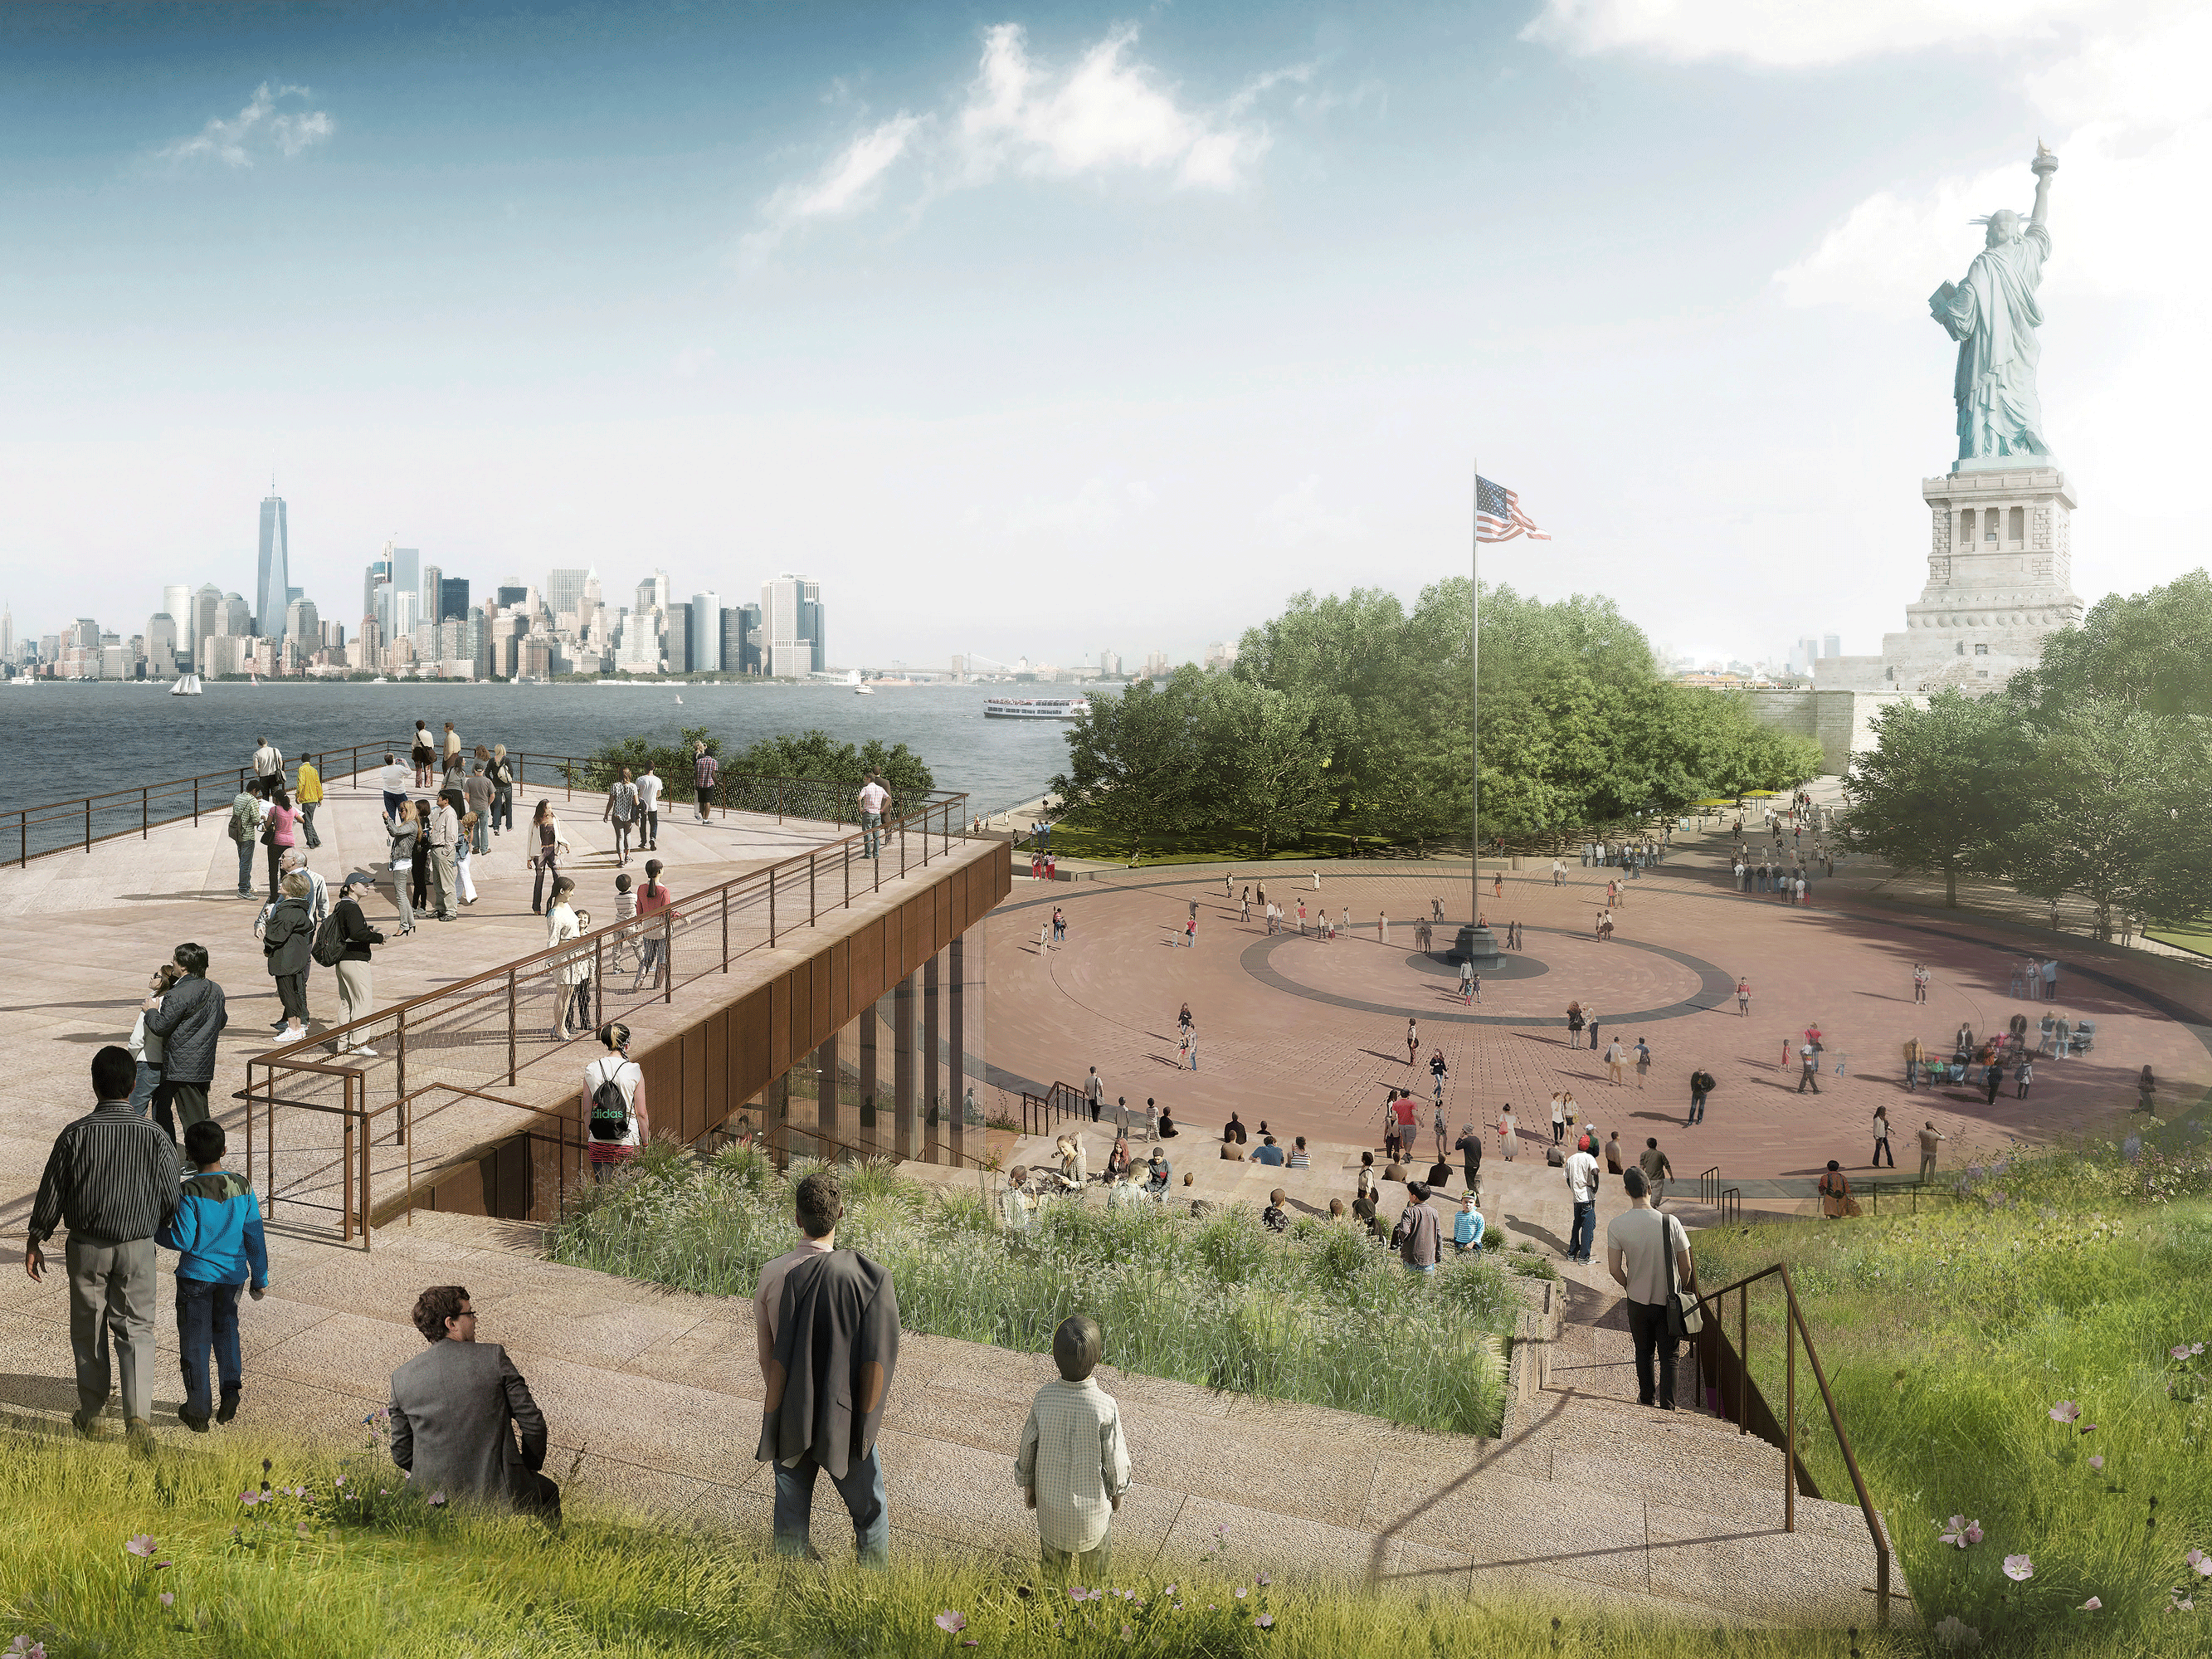 FXFOWLE reveals design for $70M Statue of Liberty Museum, complete with green roof